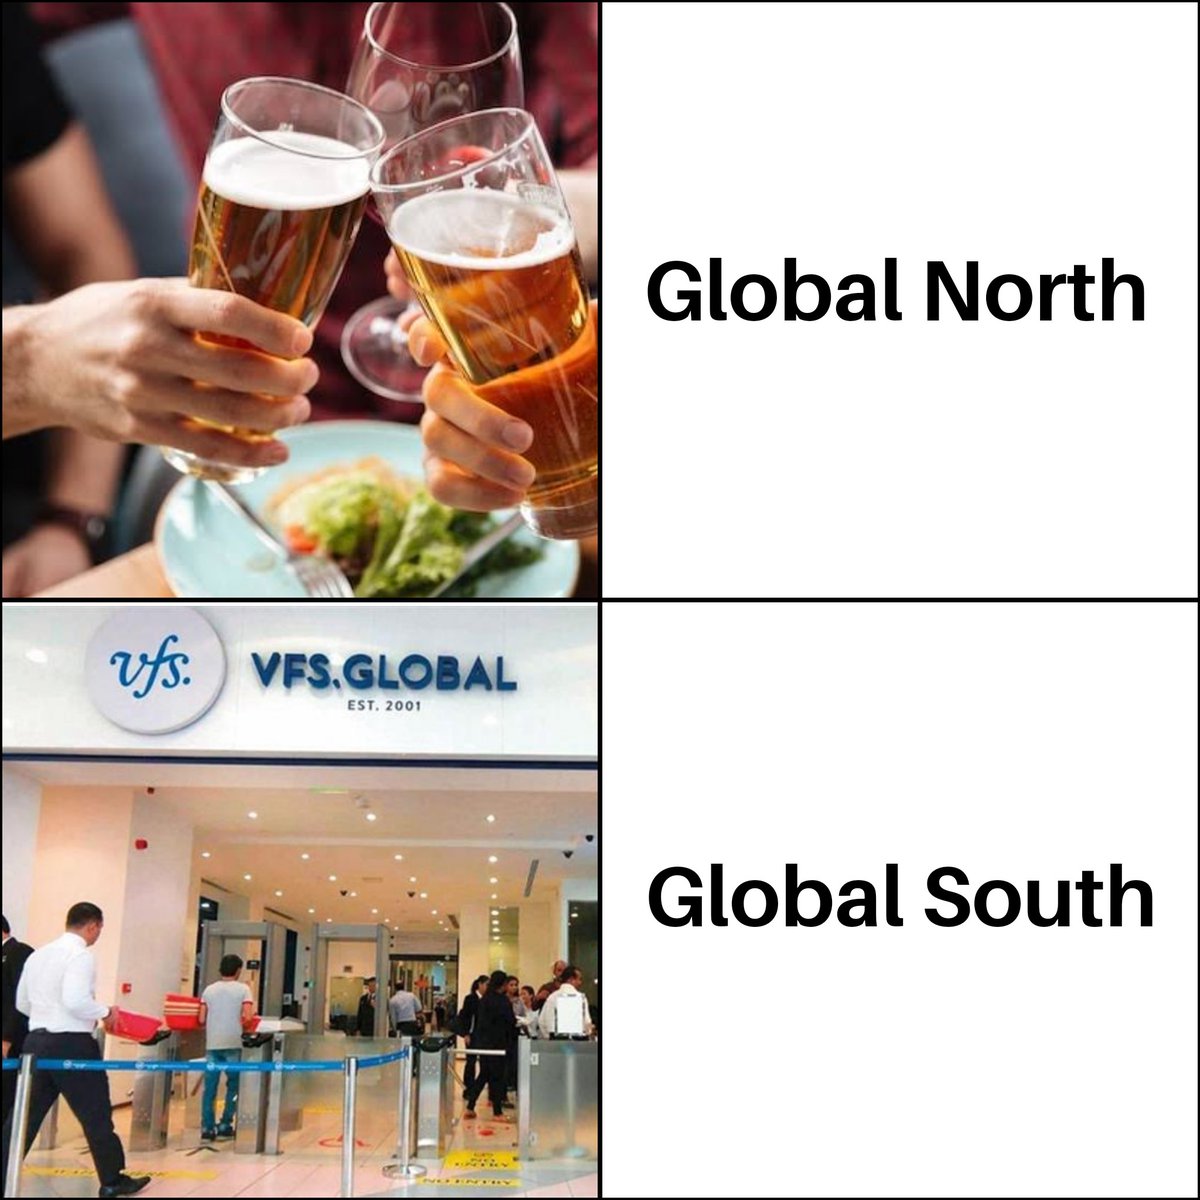 Conference acceptance rituals. #academicmeme #GlobalSouth @PhDVoice @PhD_Genie @AcademicChatter